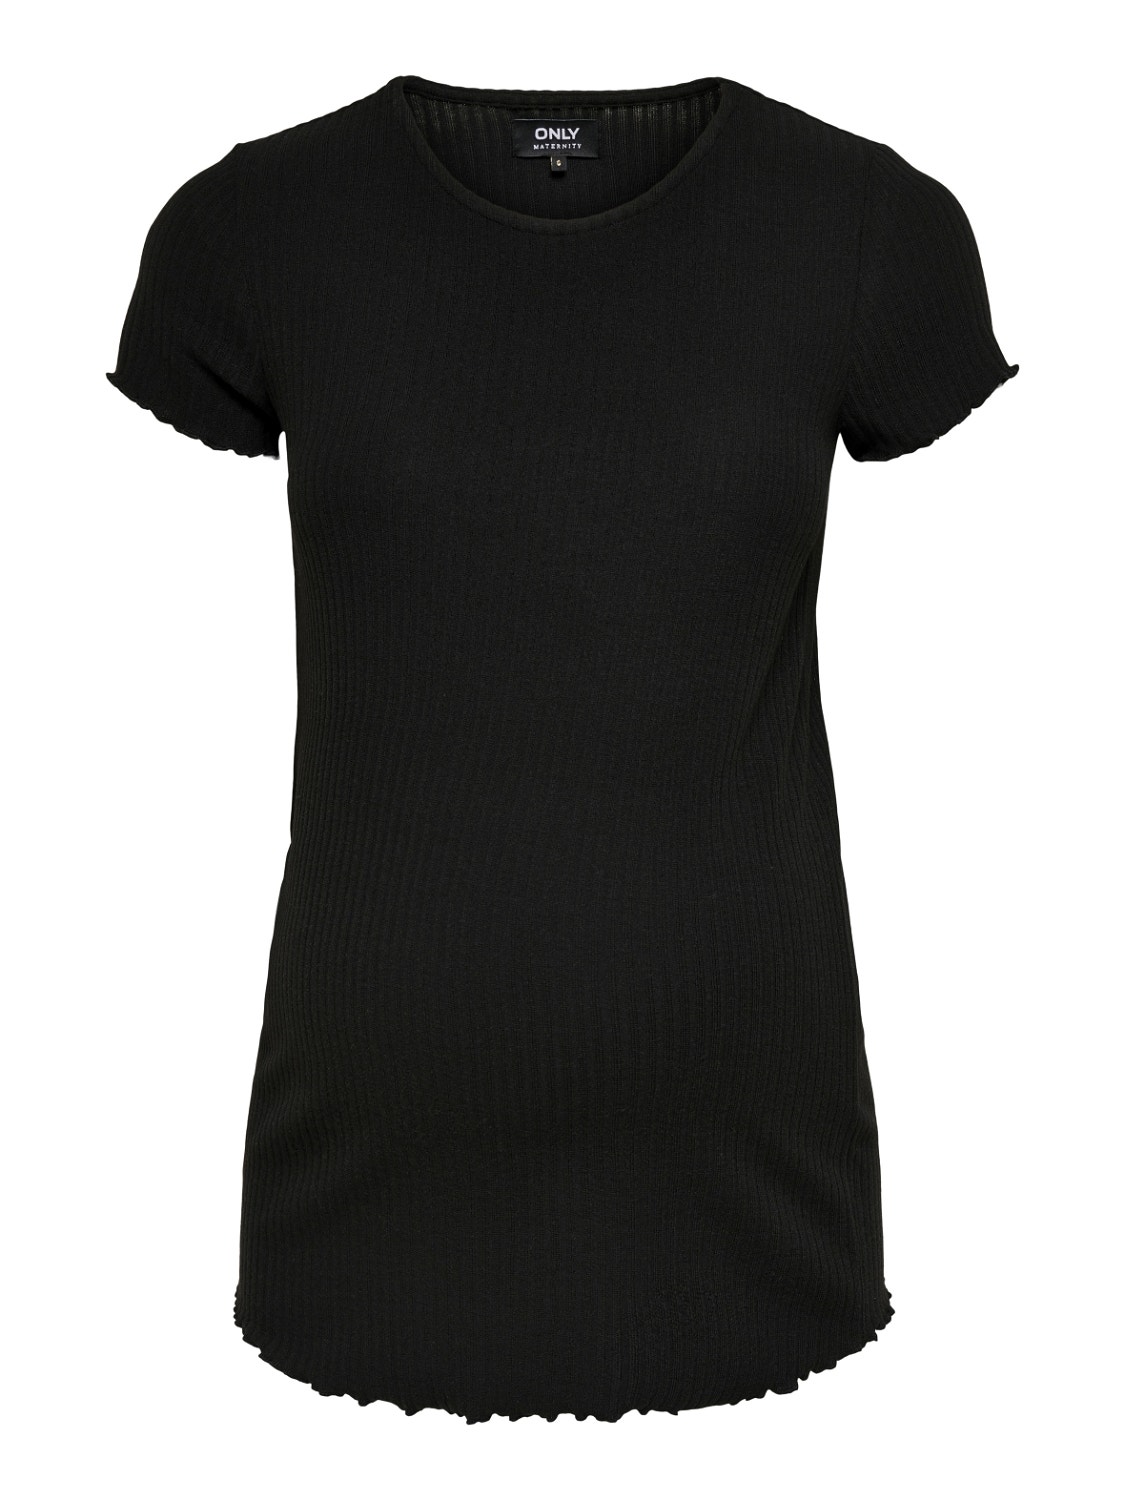 ONLY Mama short sleeved Top -Black - 15242107